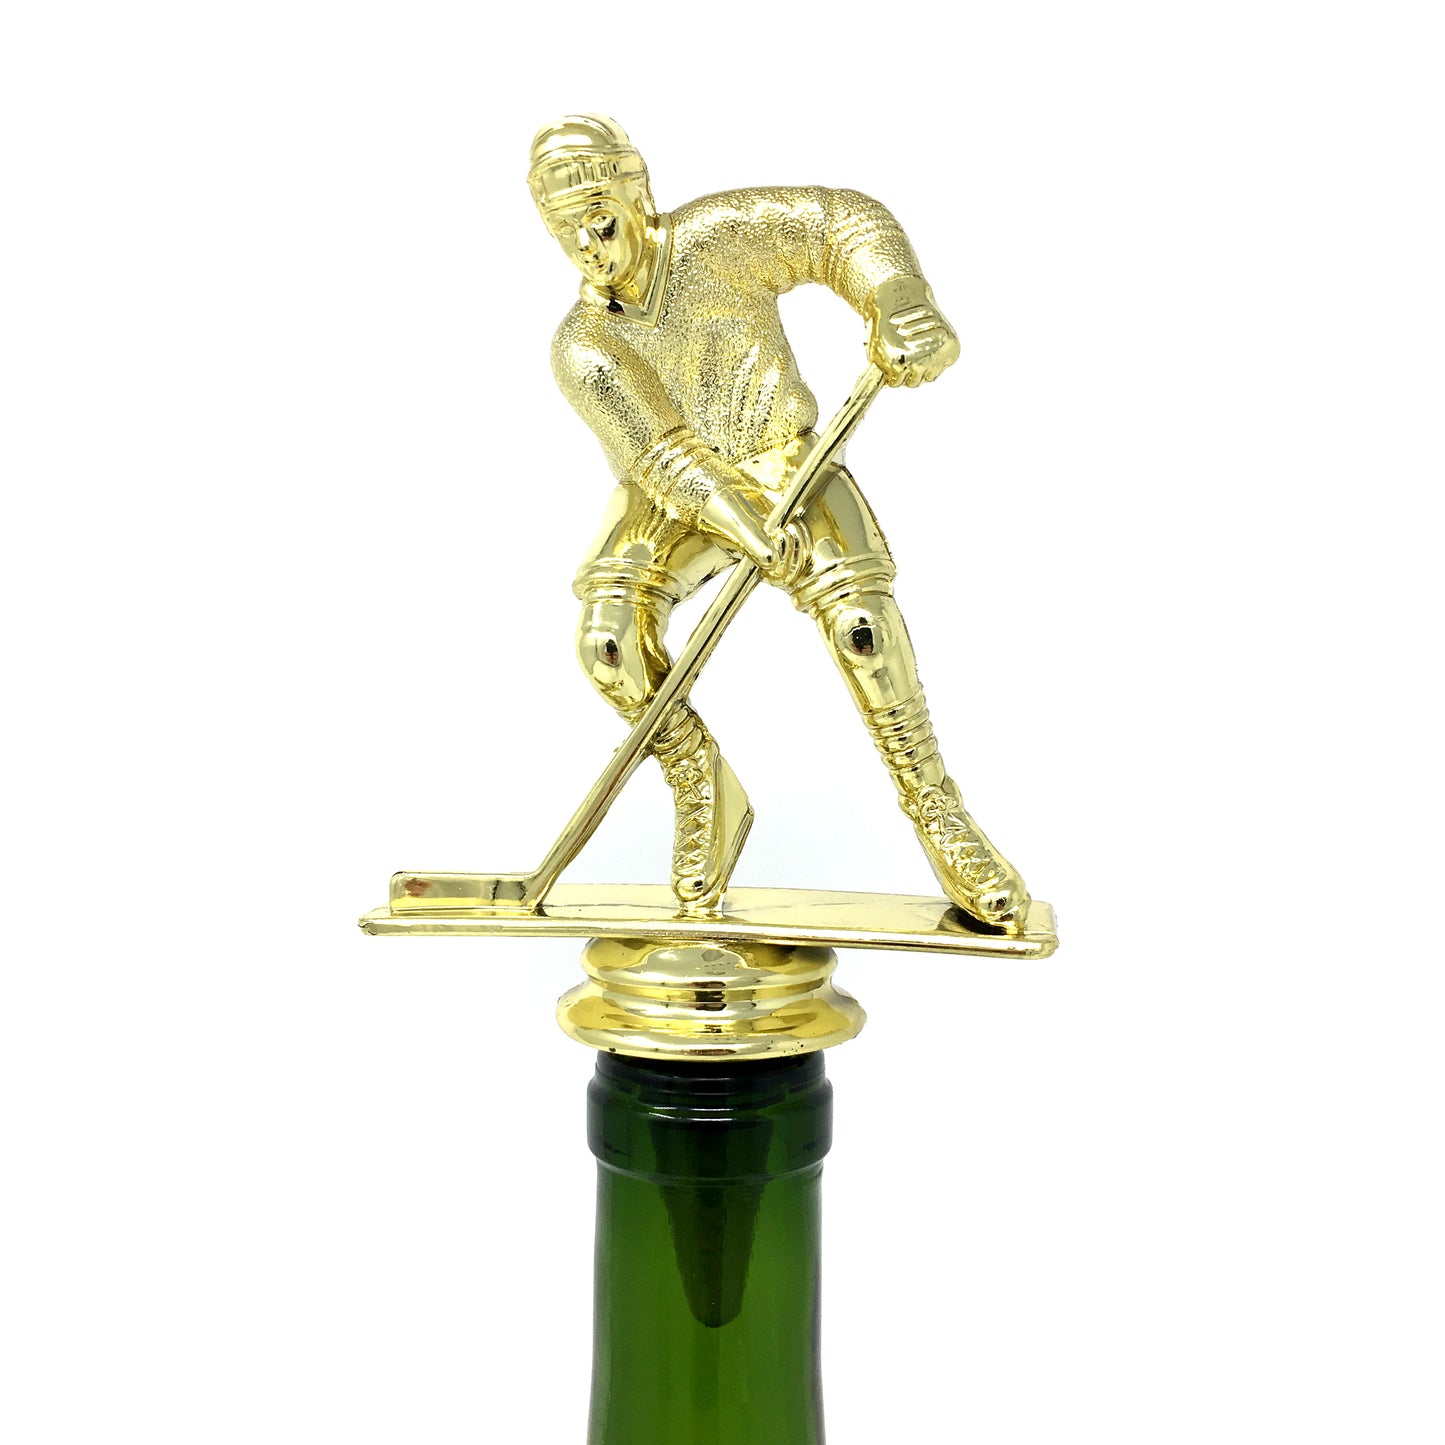 Hockey Trophy Wine Bottle Stopper with Stainless Steel Base